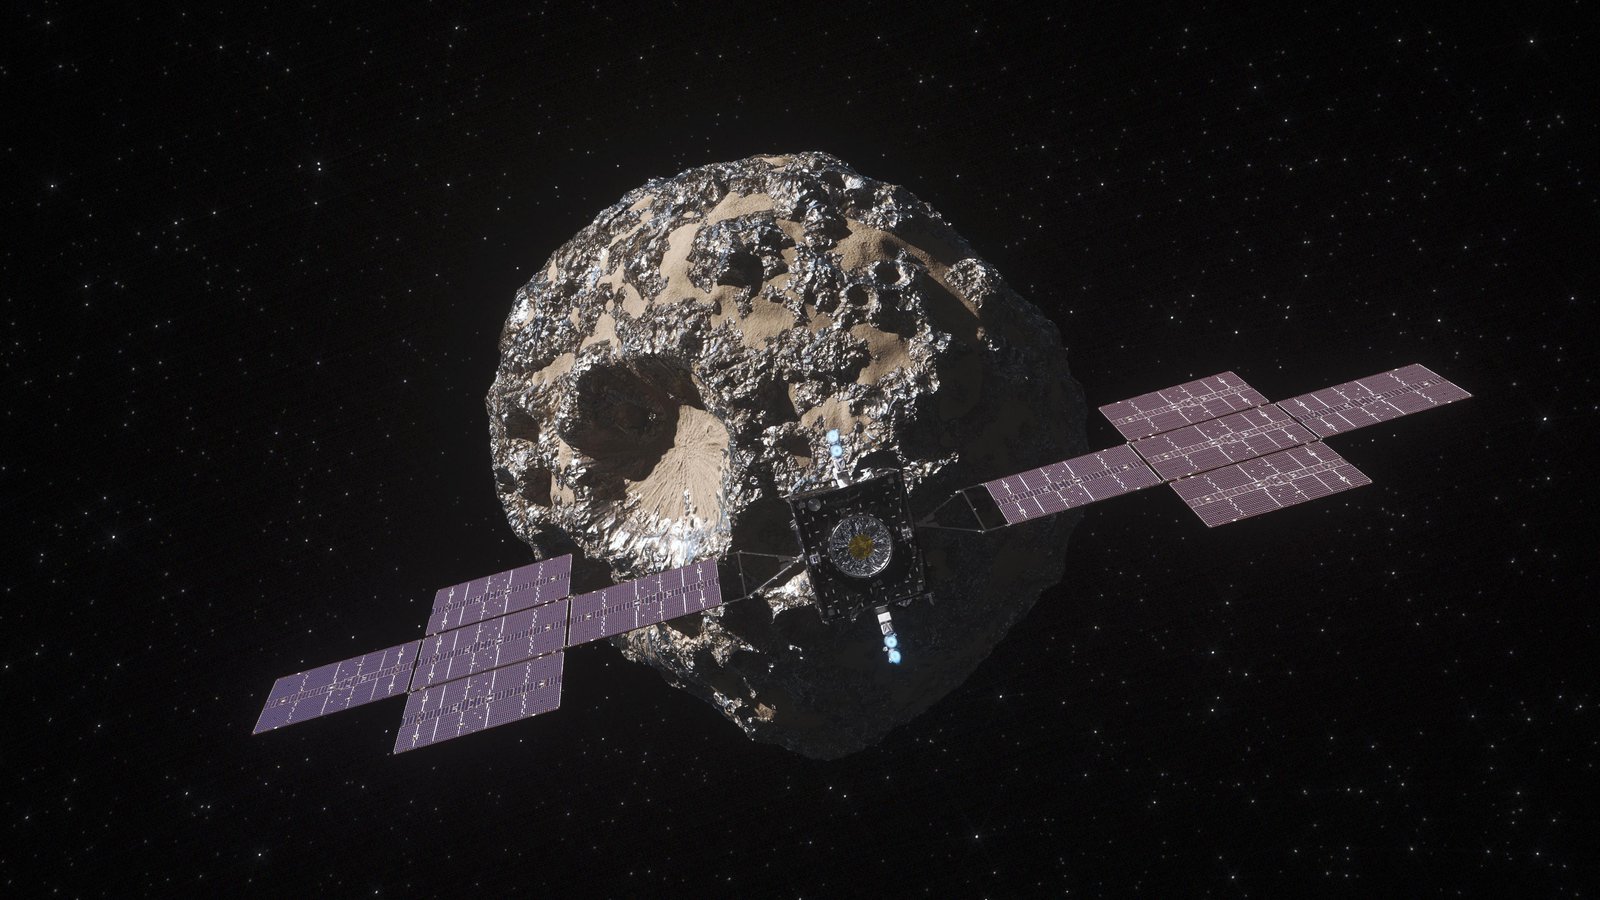 A metallic spacecraft that has purple solar panels shaped like plus-signs on either side approaches the rocky and metallic asteroid, Psyche. The asteroid is covered in craters, including one prominent circular crater. The spacecraft and asteroid are set in the black background of space.